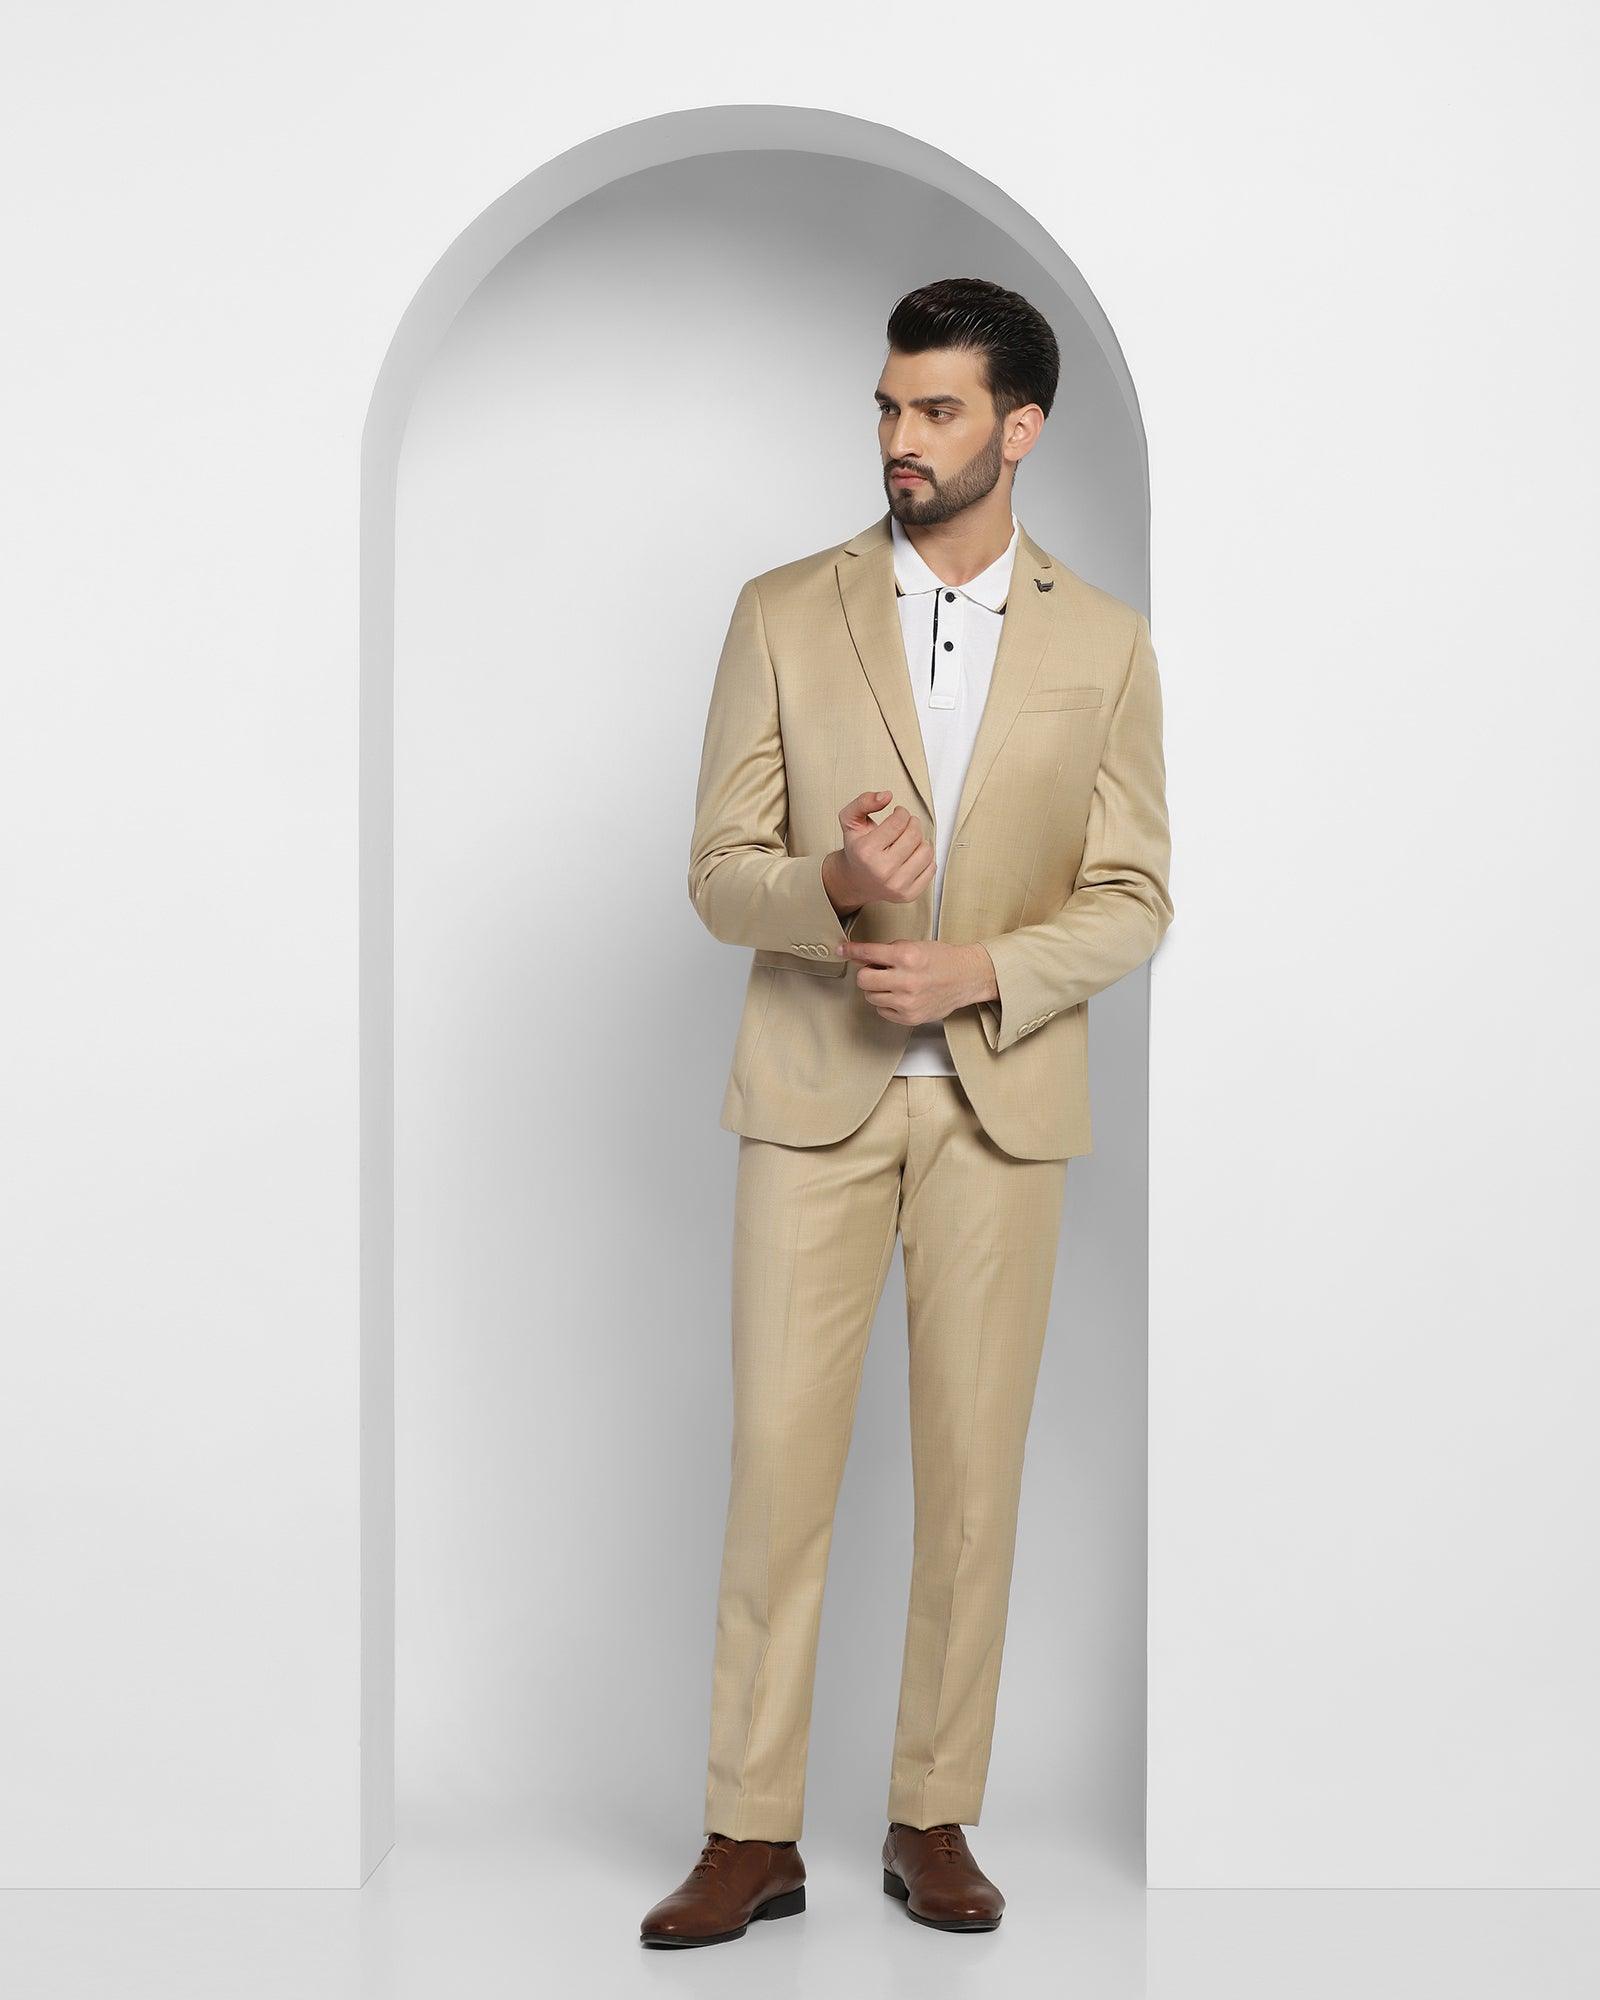 Coat+Vest+Pant ₹34999.00 Have a look at our double lapel 3Pc suit in powder  blue colour made with all weather suiting fabric teamed up with… | Instagram